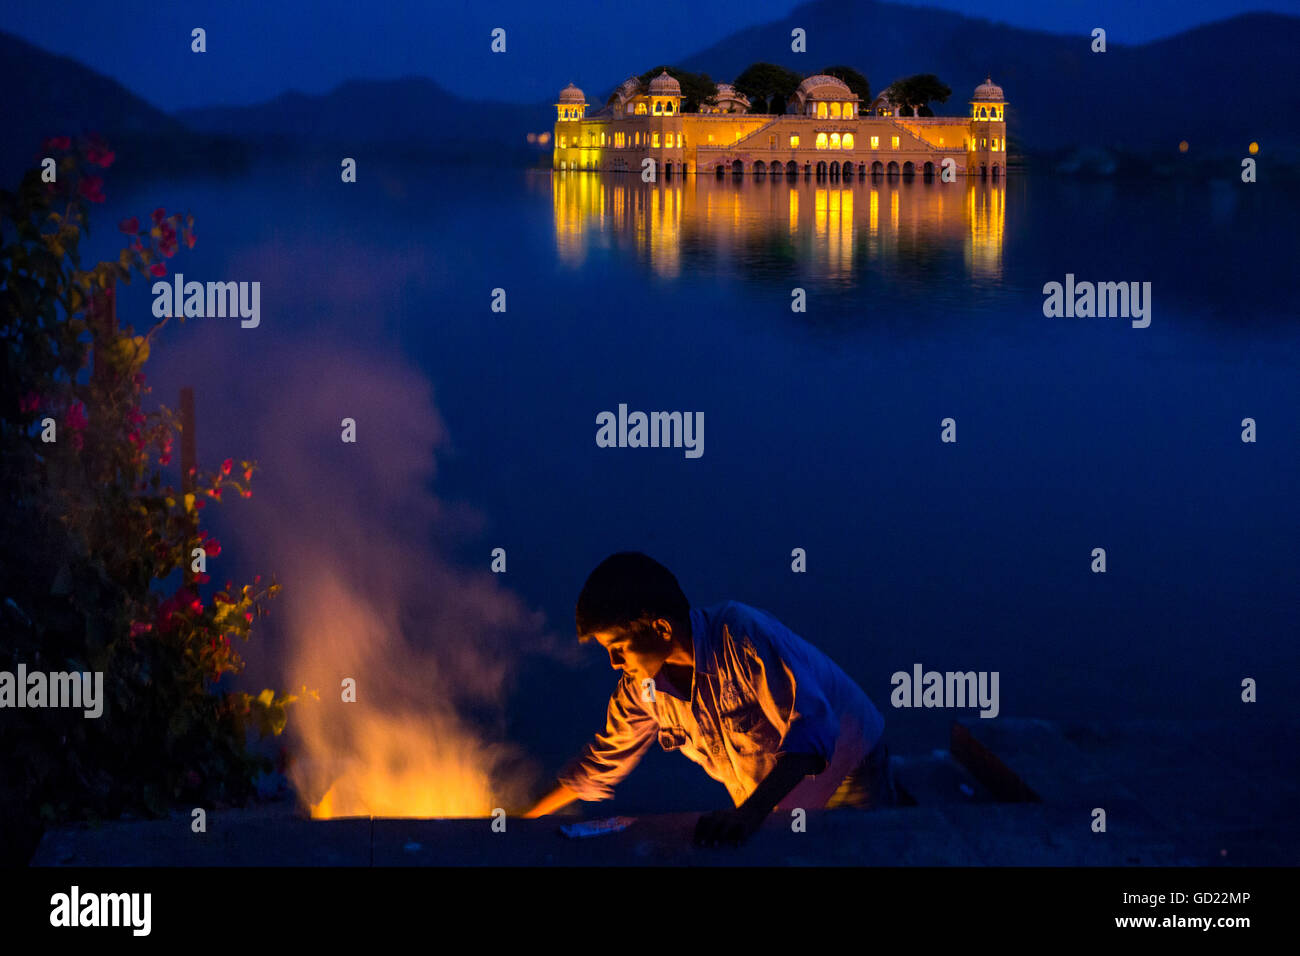 Boy cooking at twilight by the Jal Mahal Floating Lake Palace, Jaipur, Rajasthan, India, Asia Stock Photo